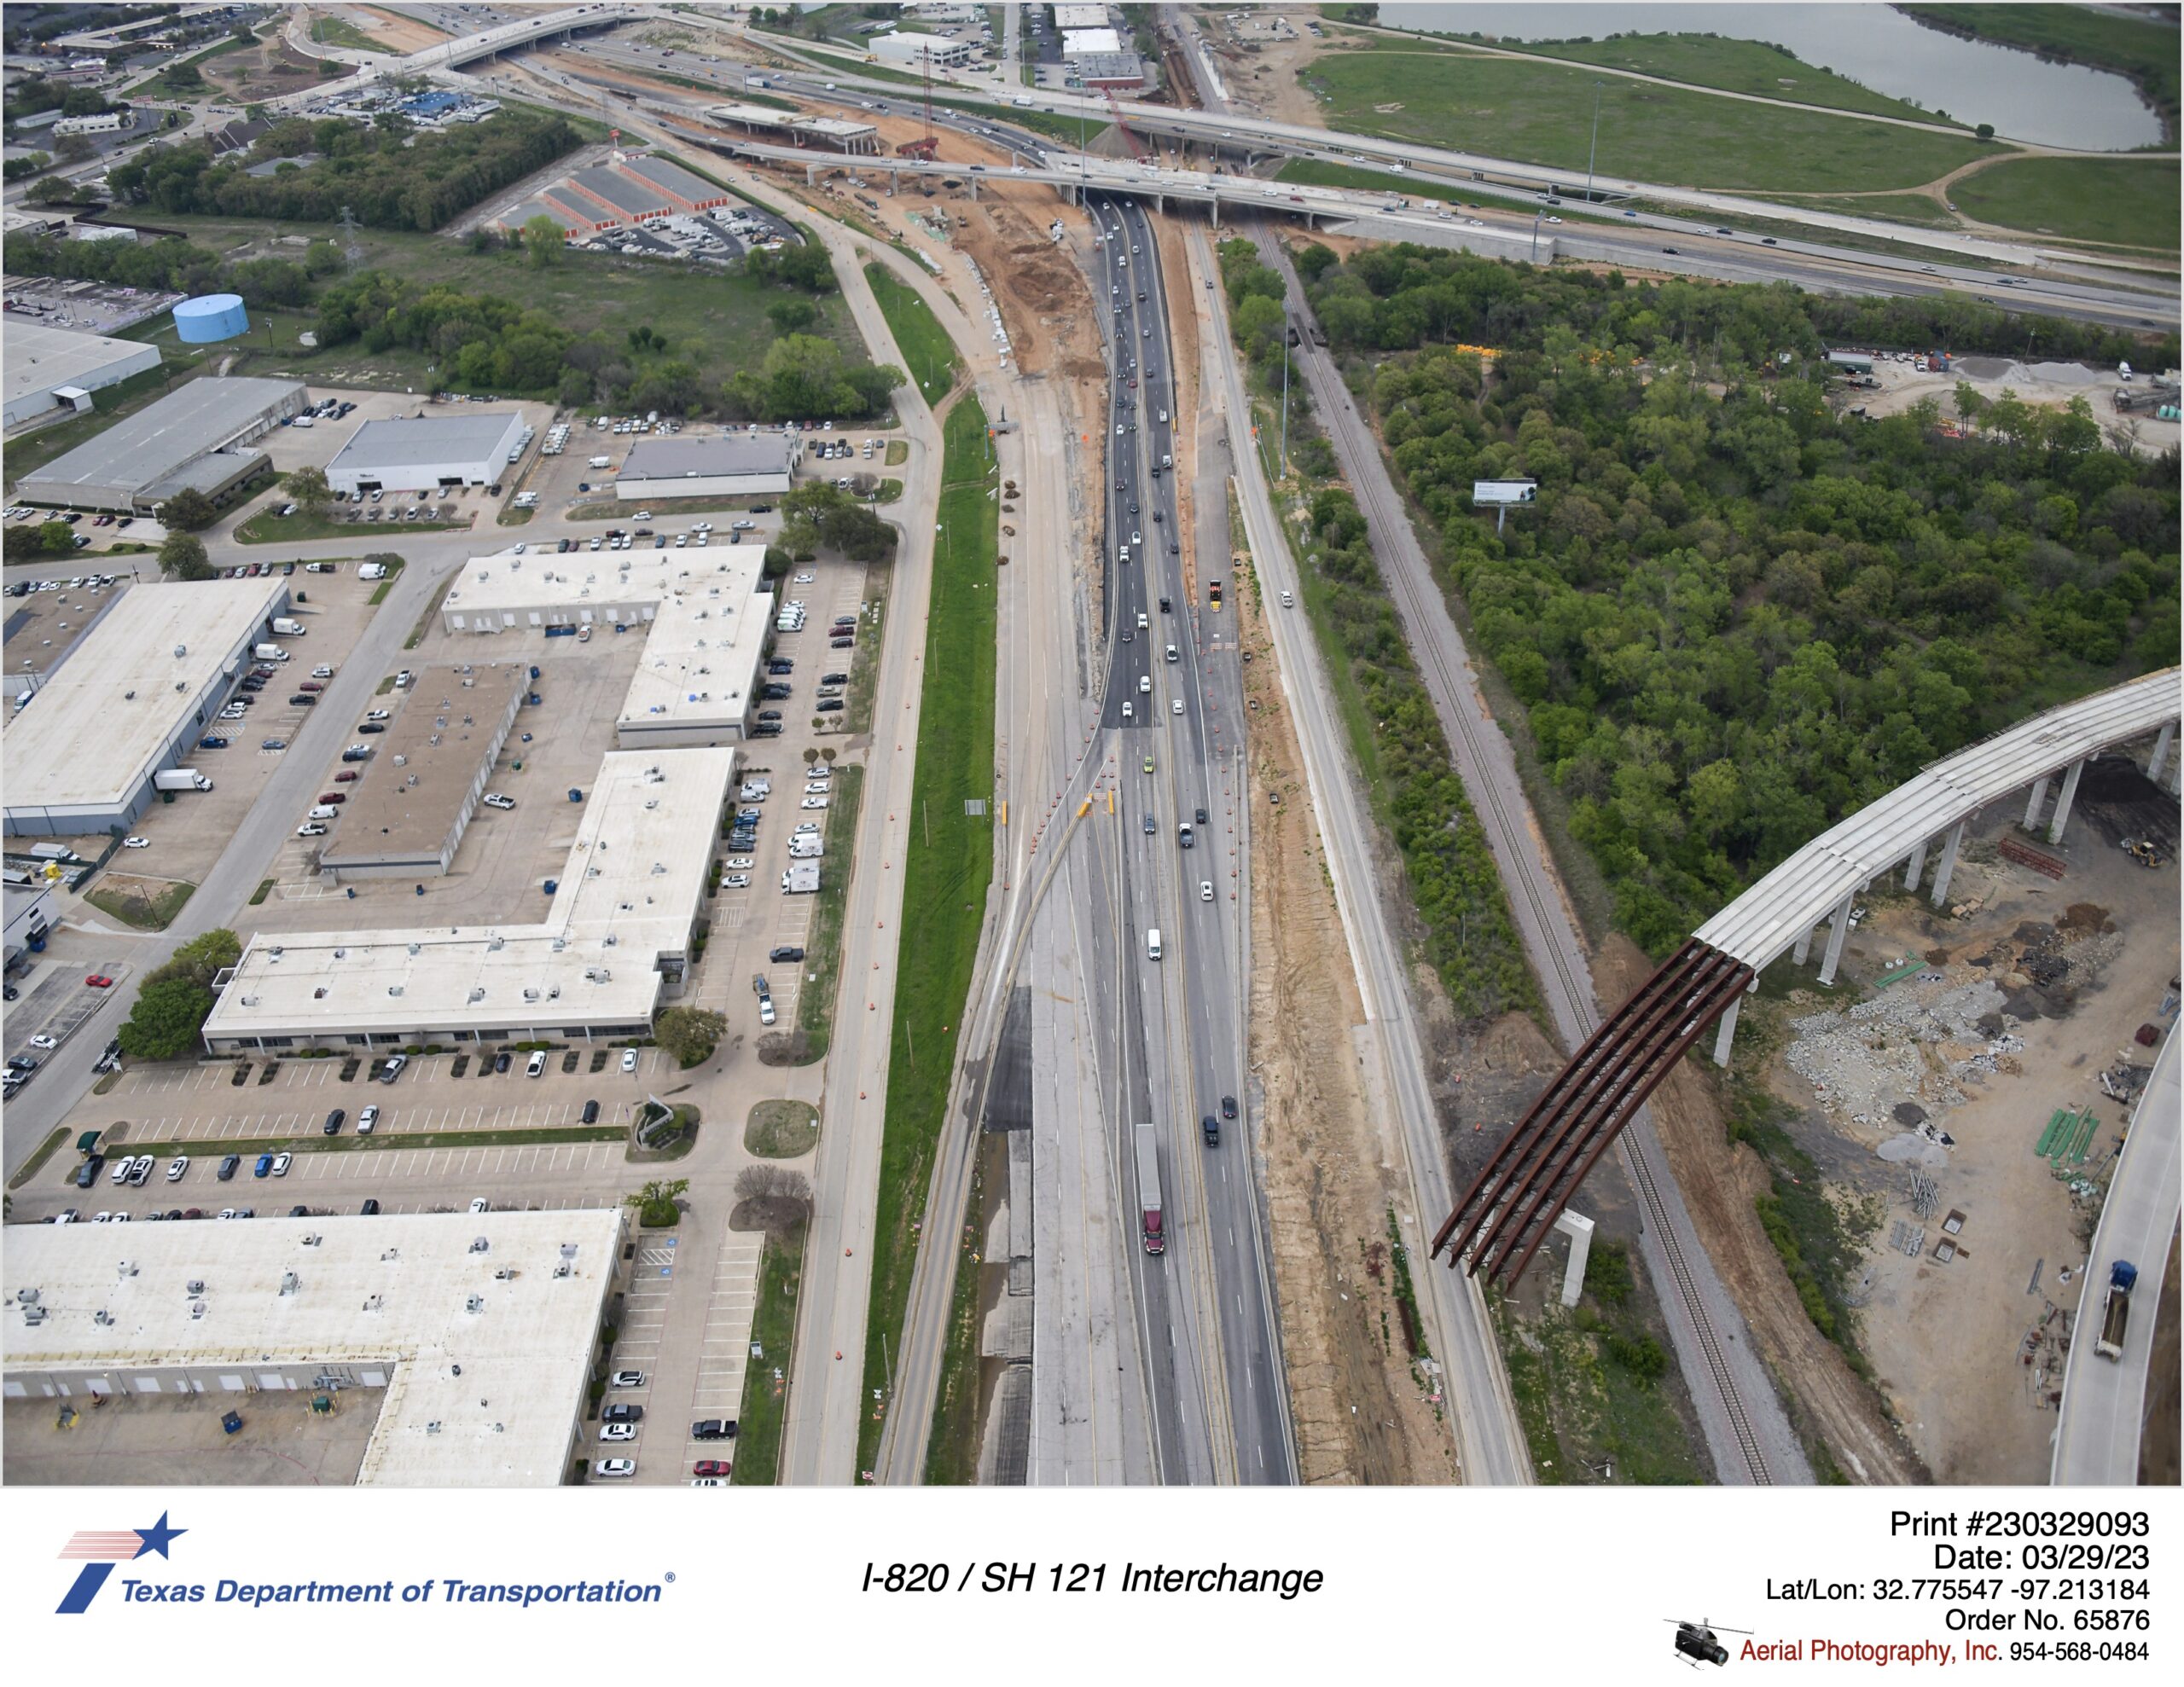 I-820 and SH 121 interchange in background. March 2023.